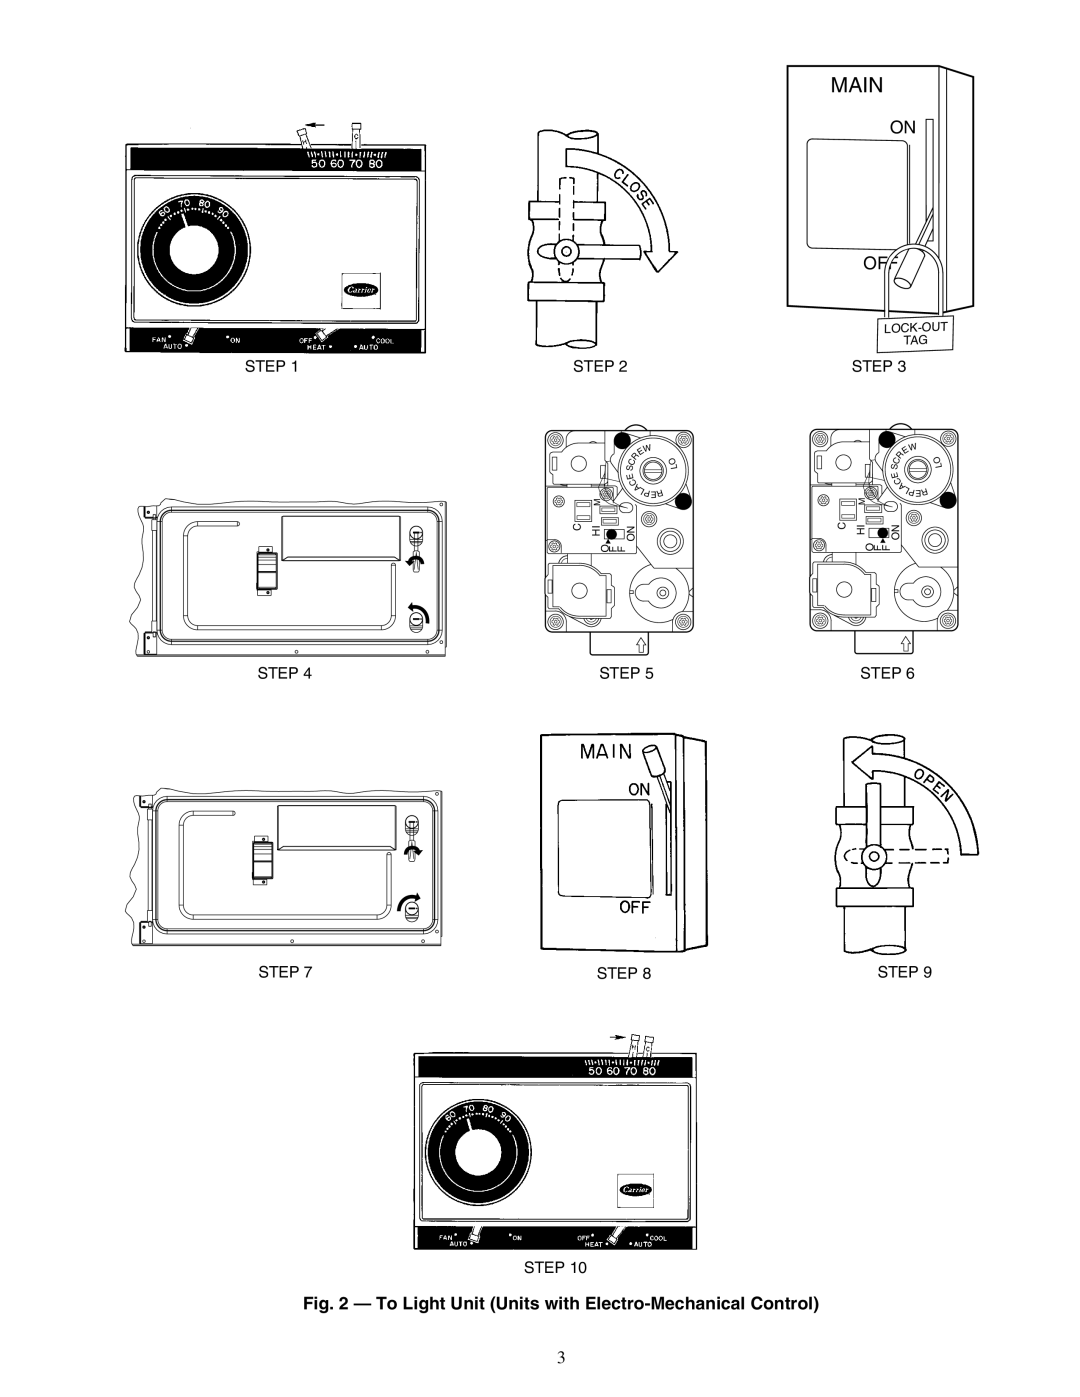 Carrier 48PG03---16 specifications Main, On Off 